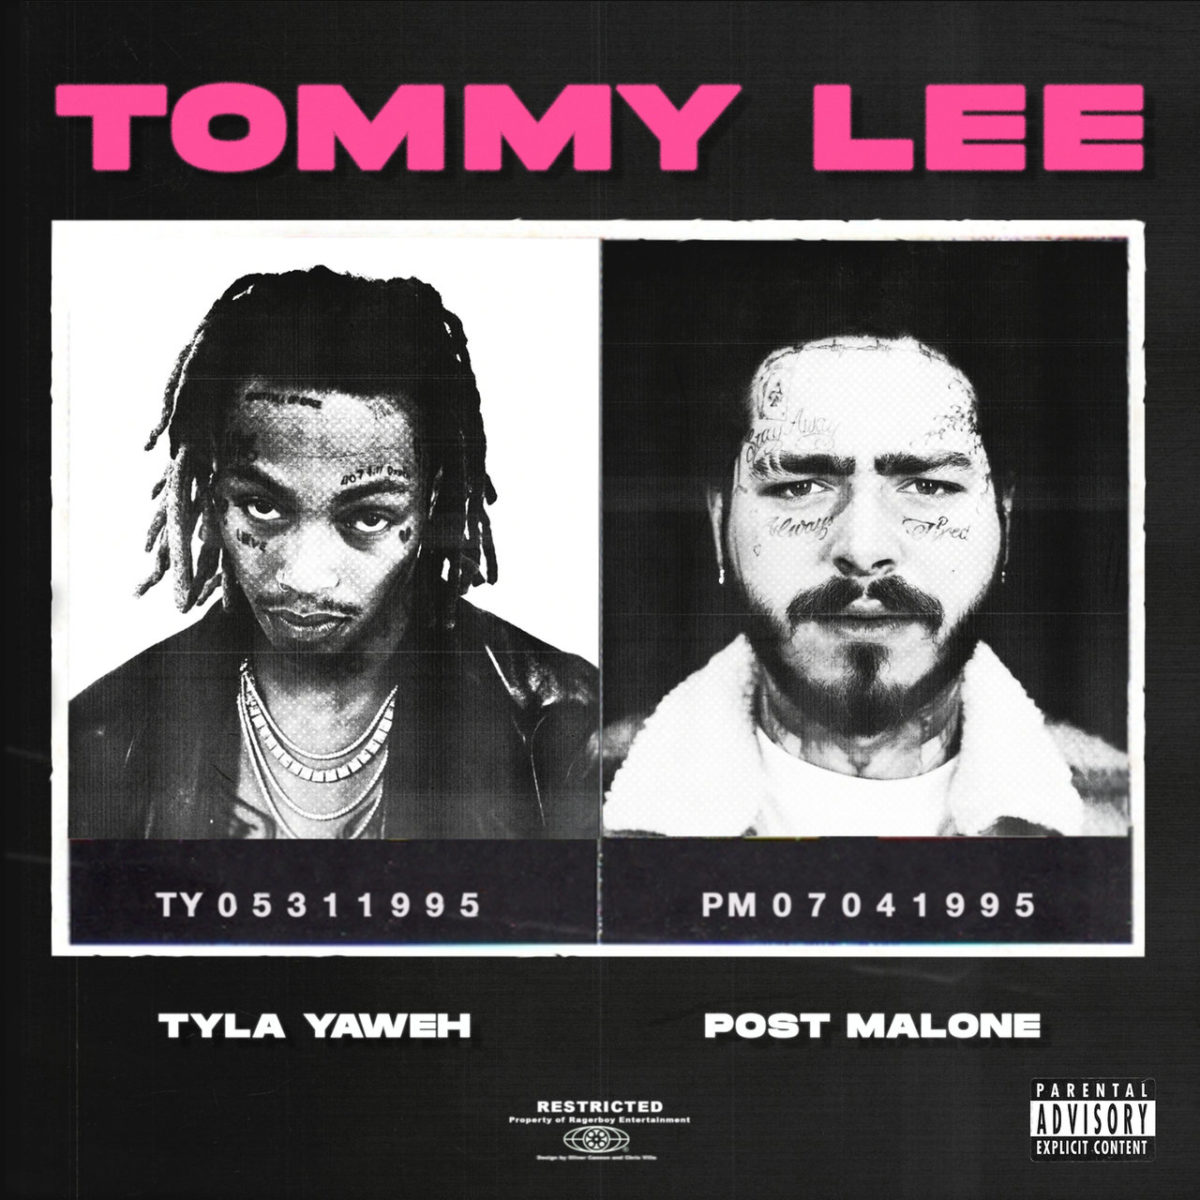 Tyla Yaweh - Tommy Lee (ft. Post Malone) (Cover)